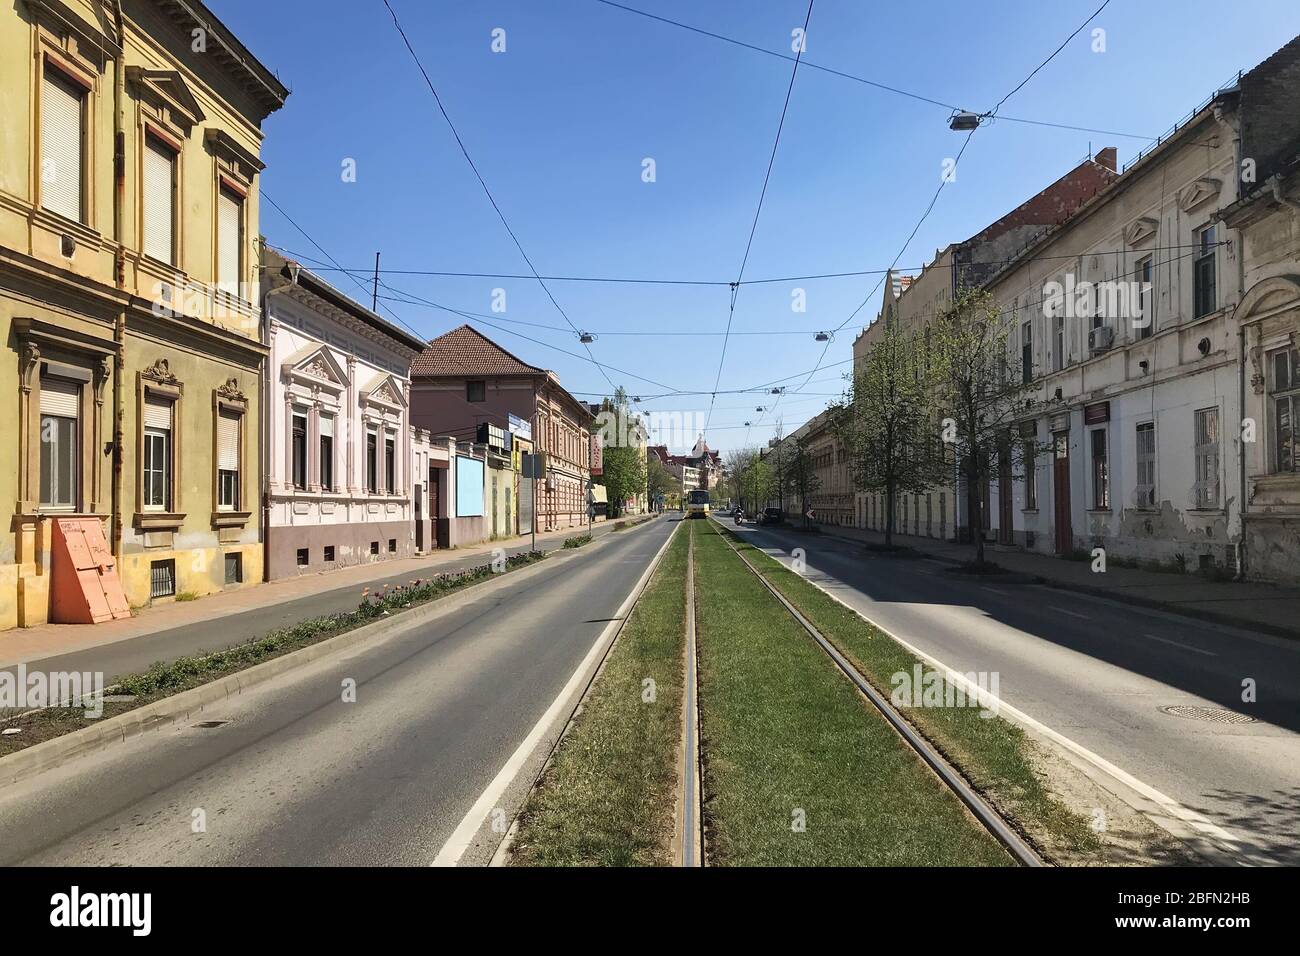 Szeged, Hungary, April 11: View of a deserted street during a coronavirus quarantine in the city of Szeged on a Sunny spring day, April 11, 2020. Stock Photo